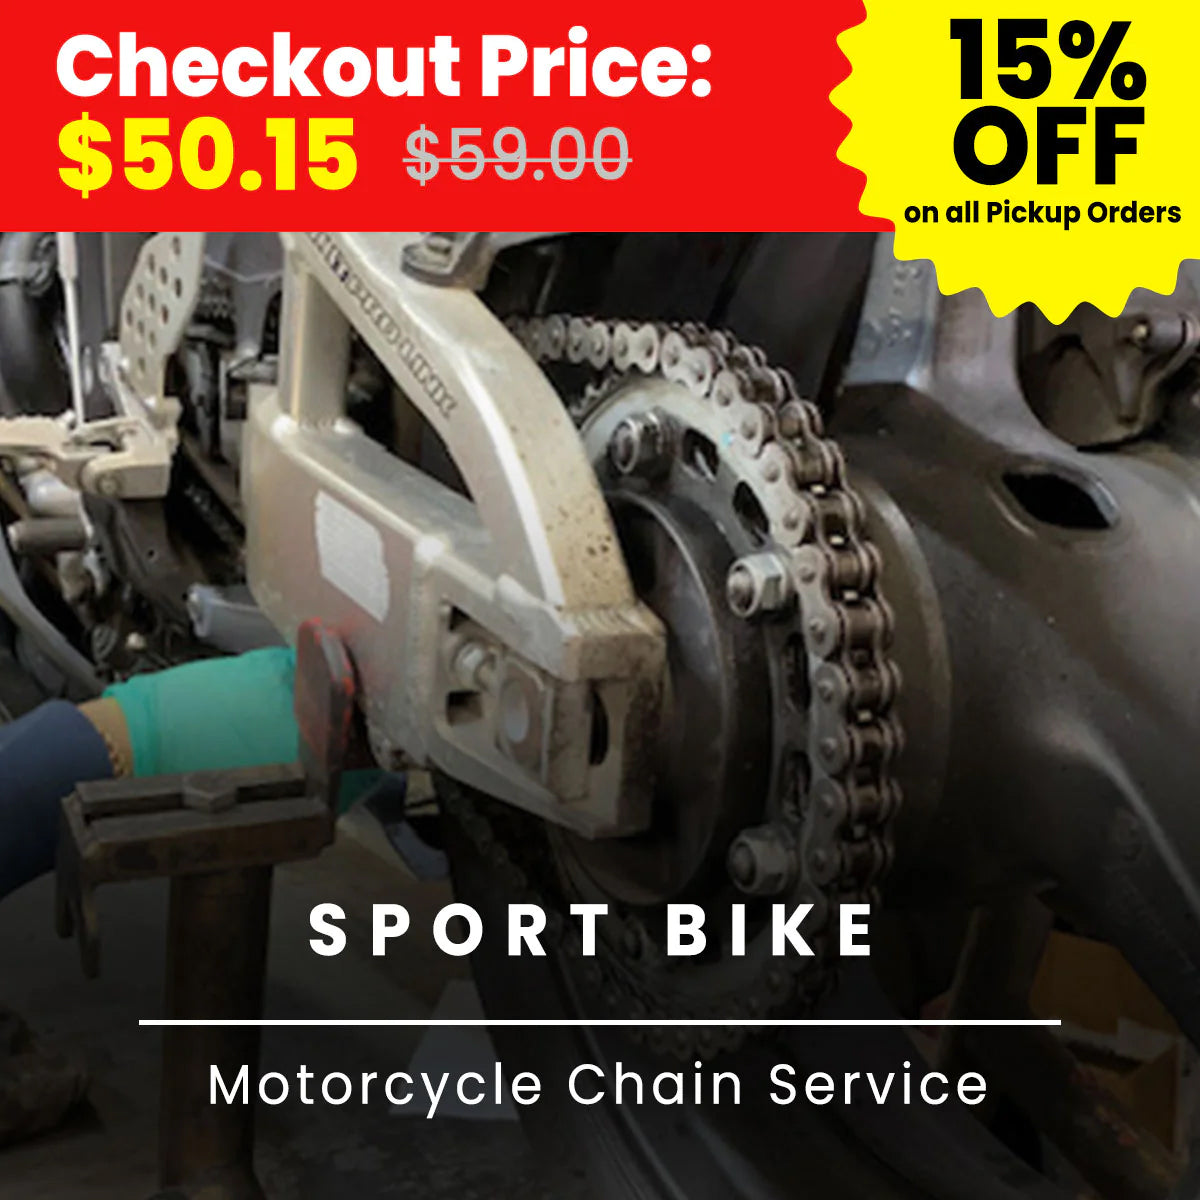 Motorcycle Chain Service (At Location: Fullerton CA)